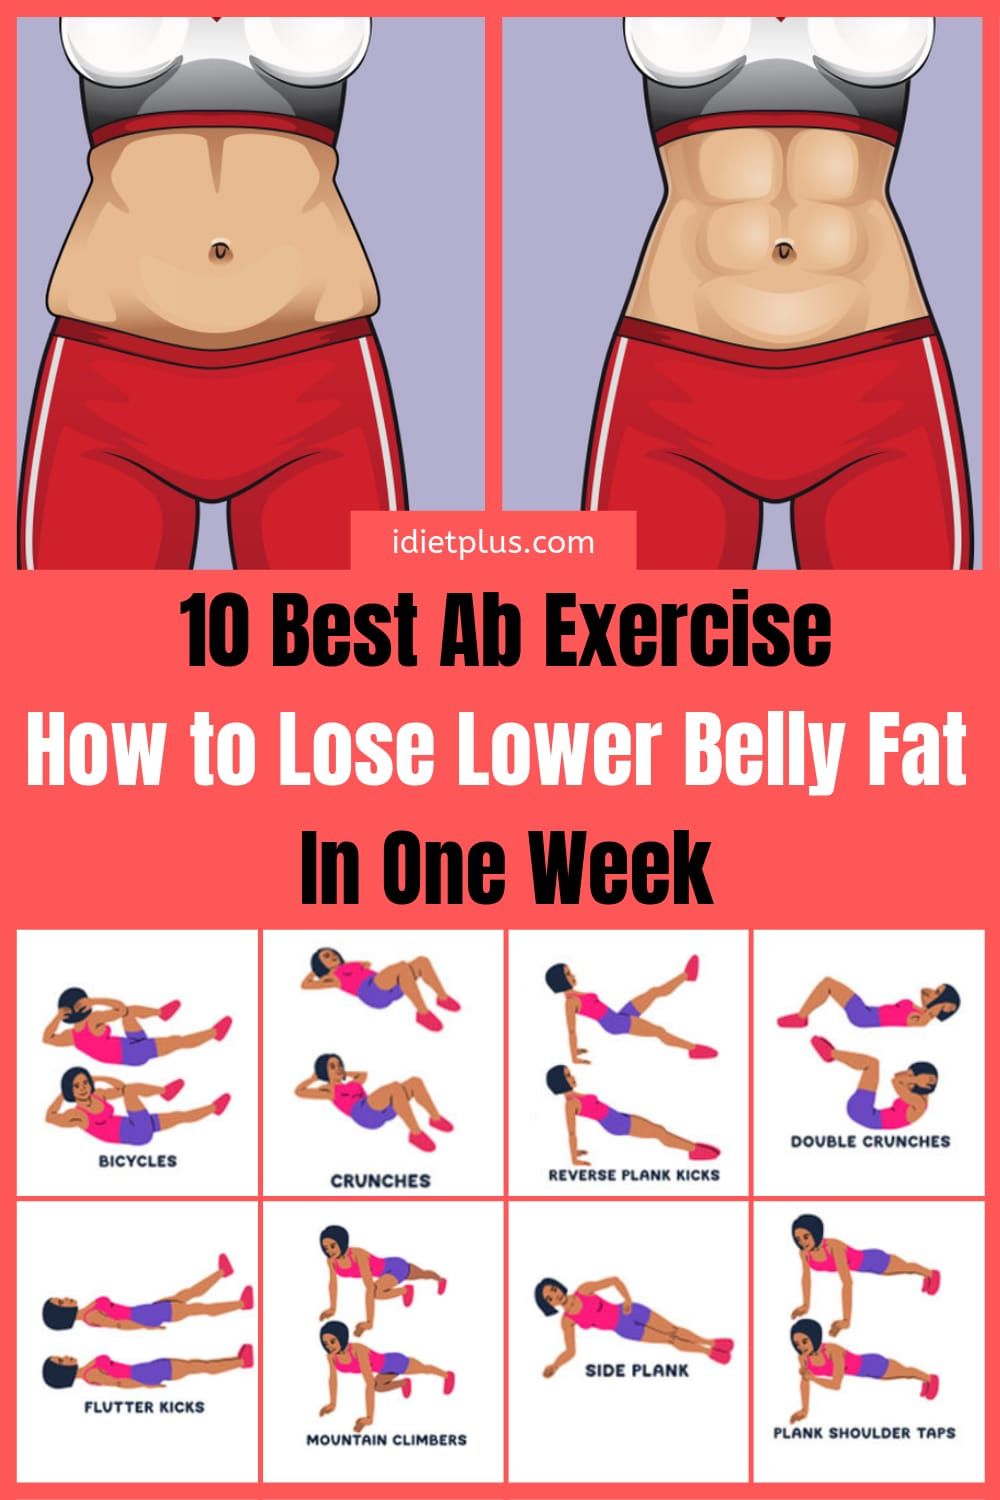 Exercises To Lose Weight And Belly Fat Fast